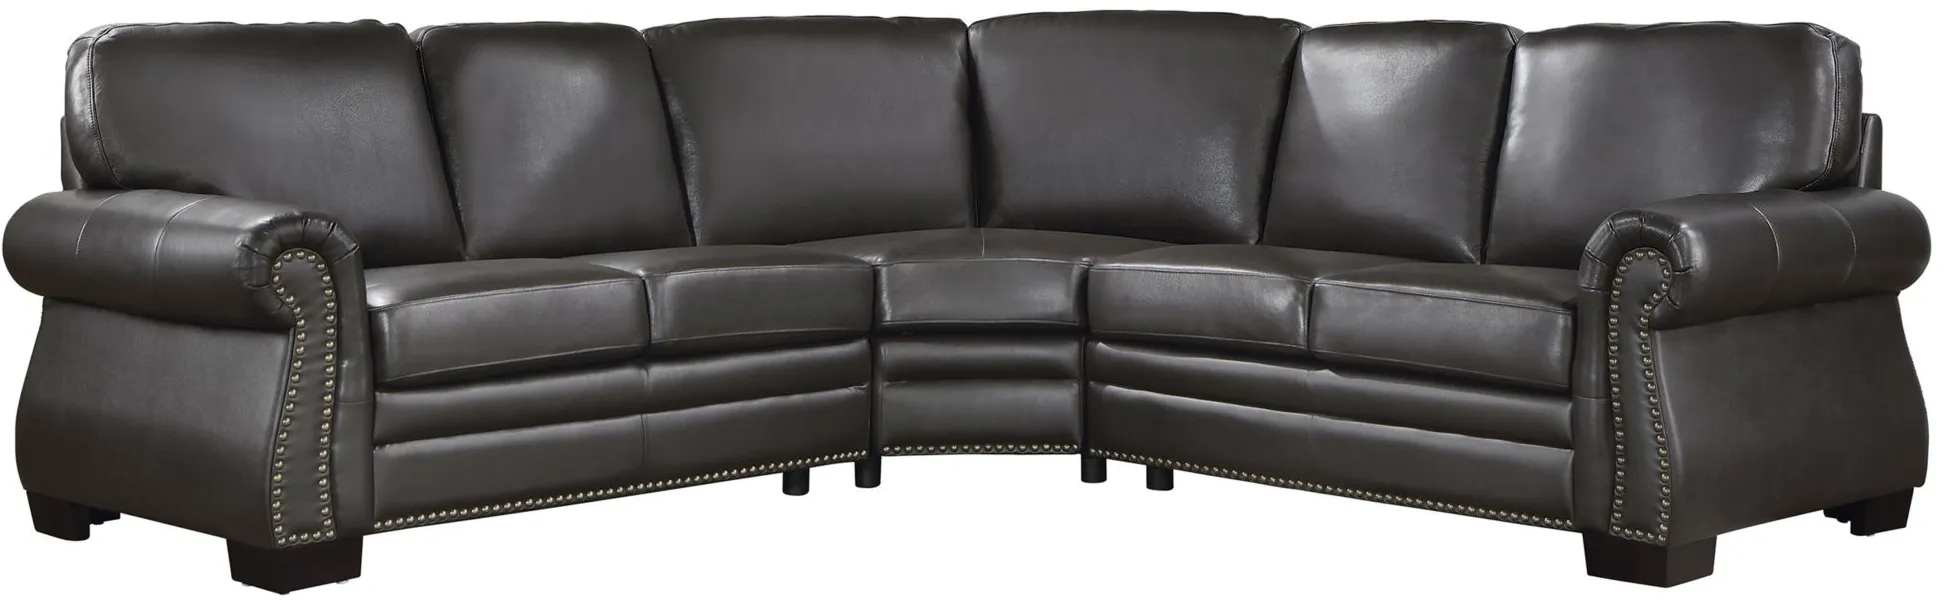 Dorelle 3-pc Sectional in Dark Brown by Homelegance